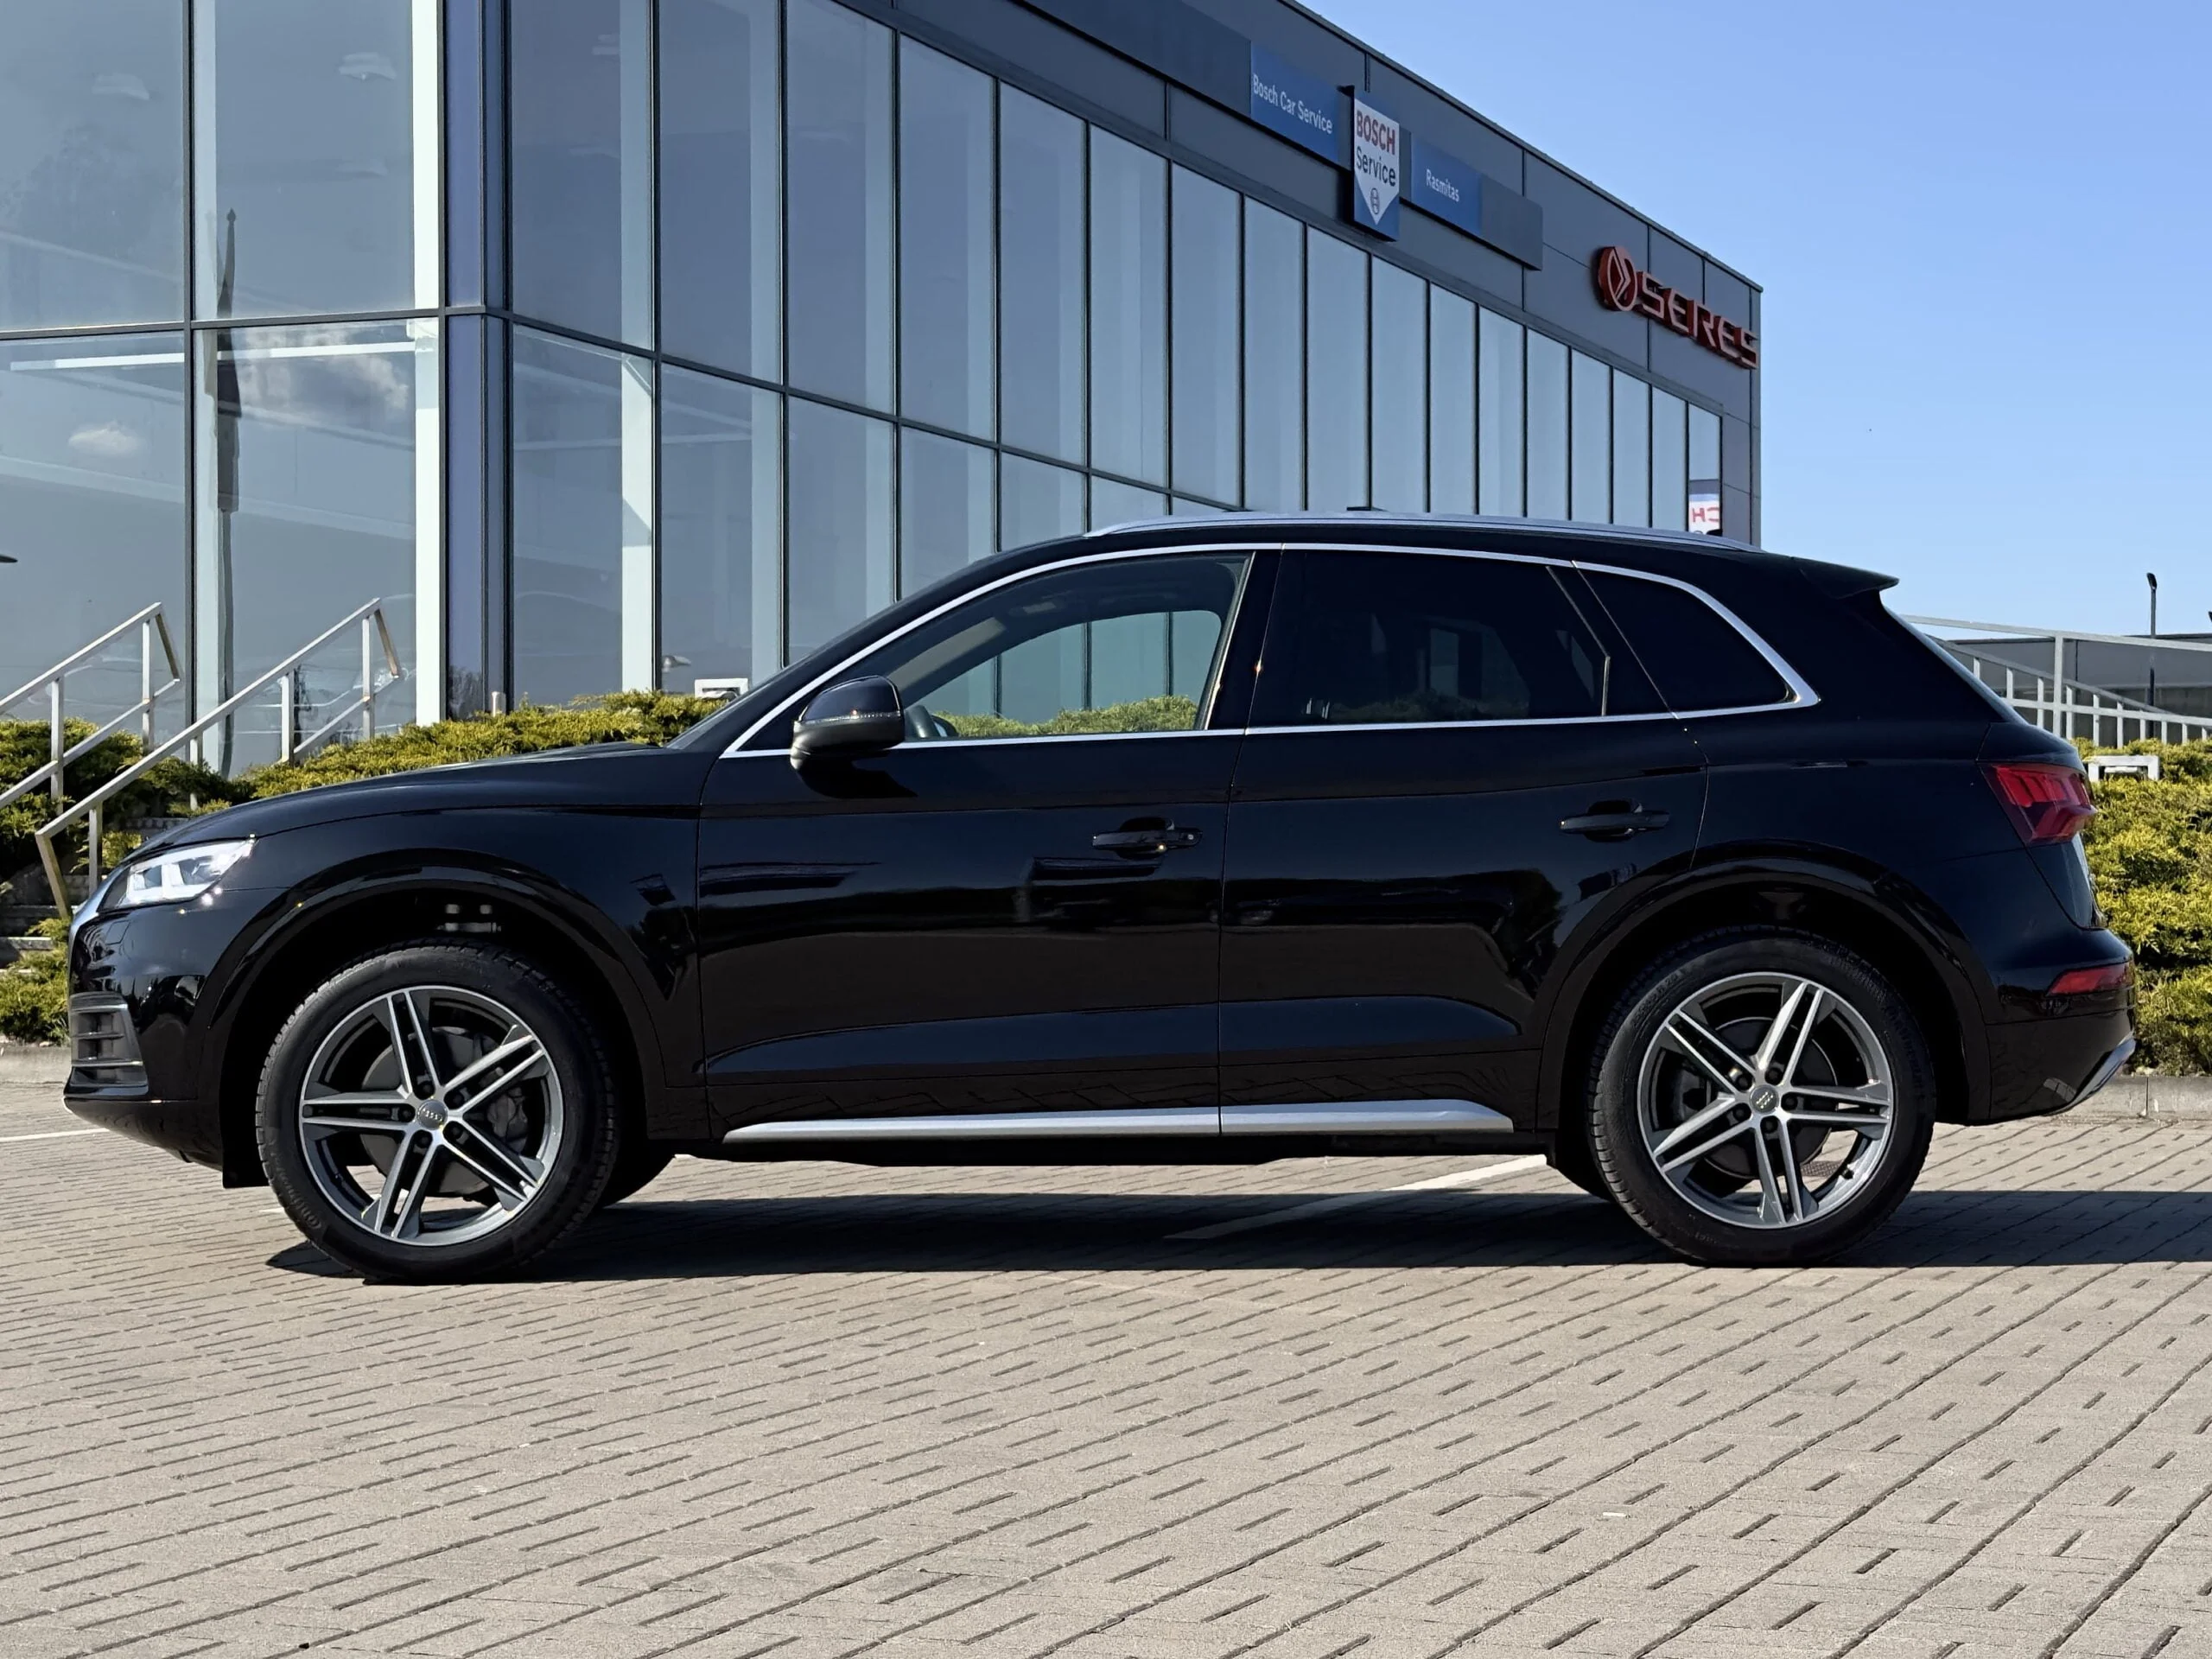 The Audi SQ5 Is Sporty, Sumptuous, and Strong